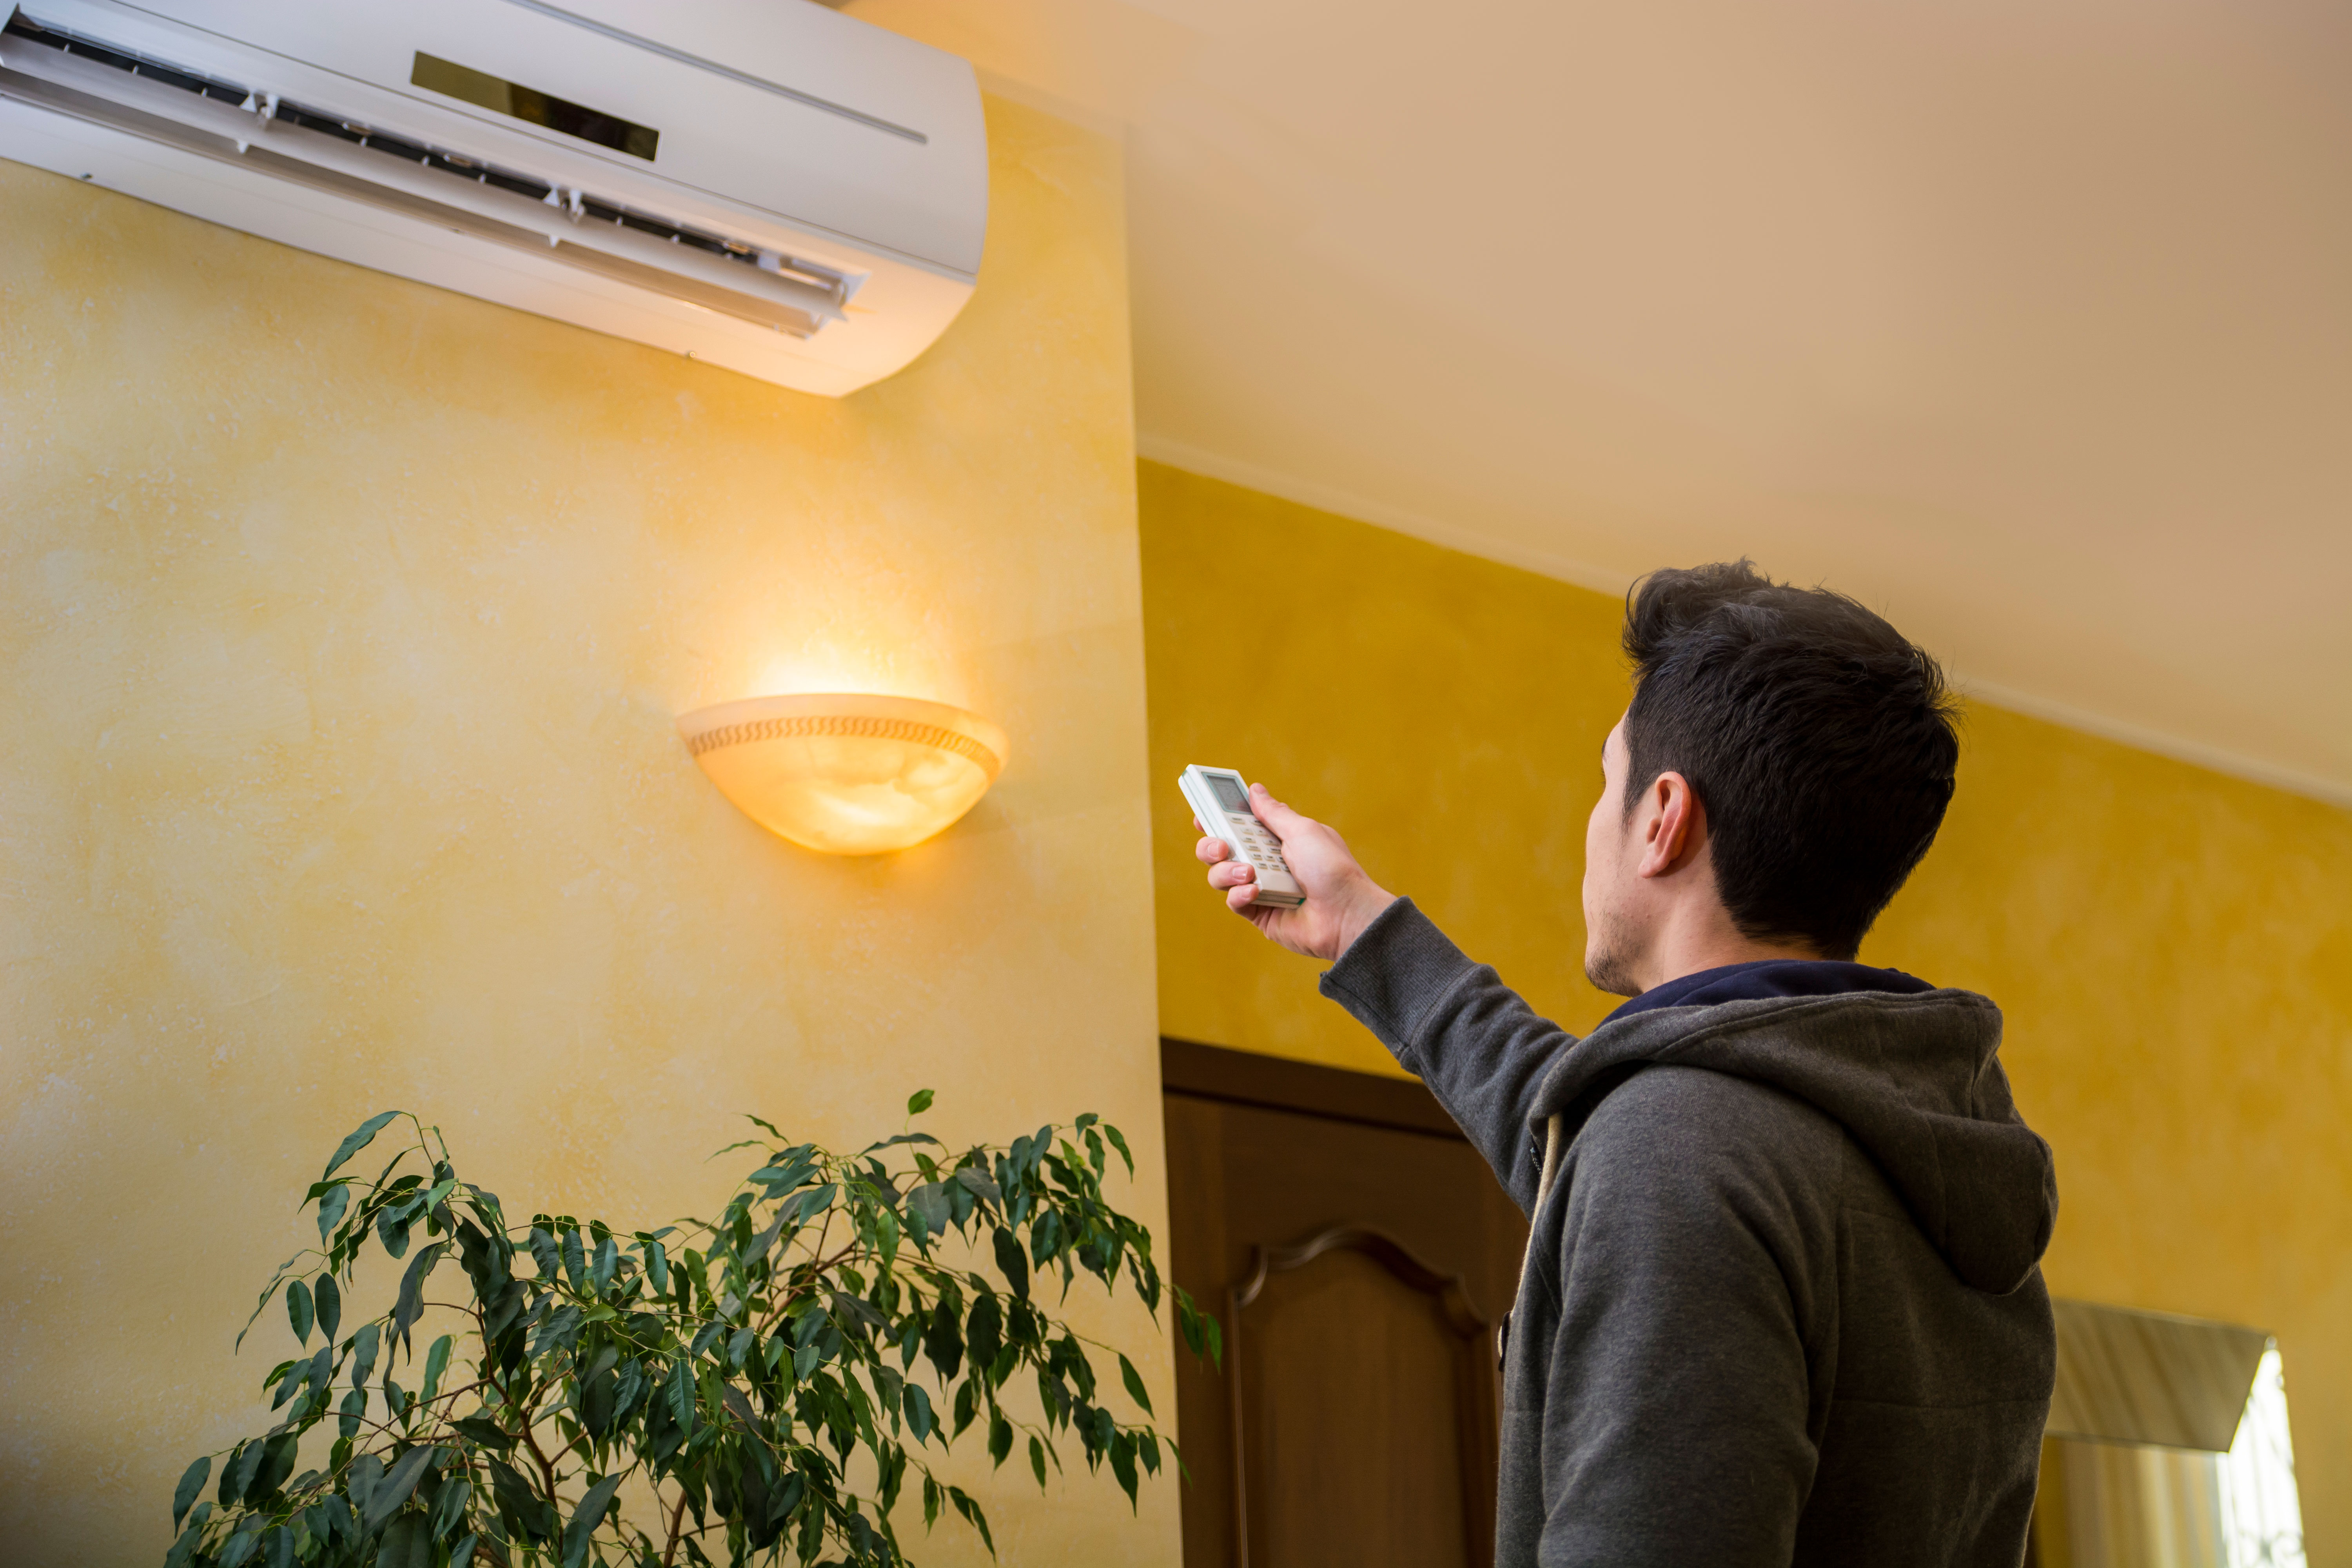 2139-ductless-gettyimages-469788638.jpg